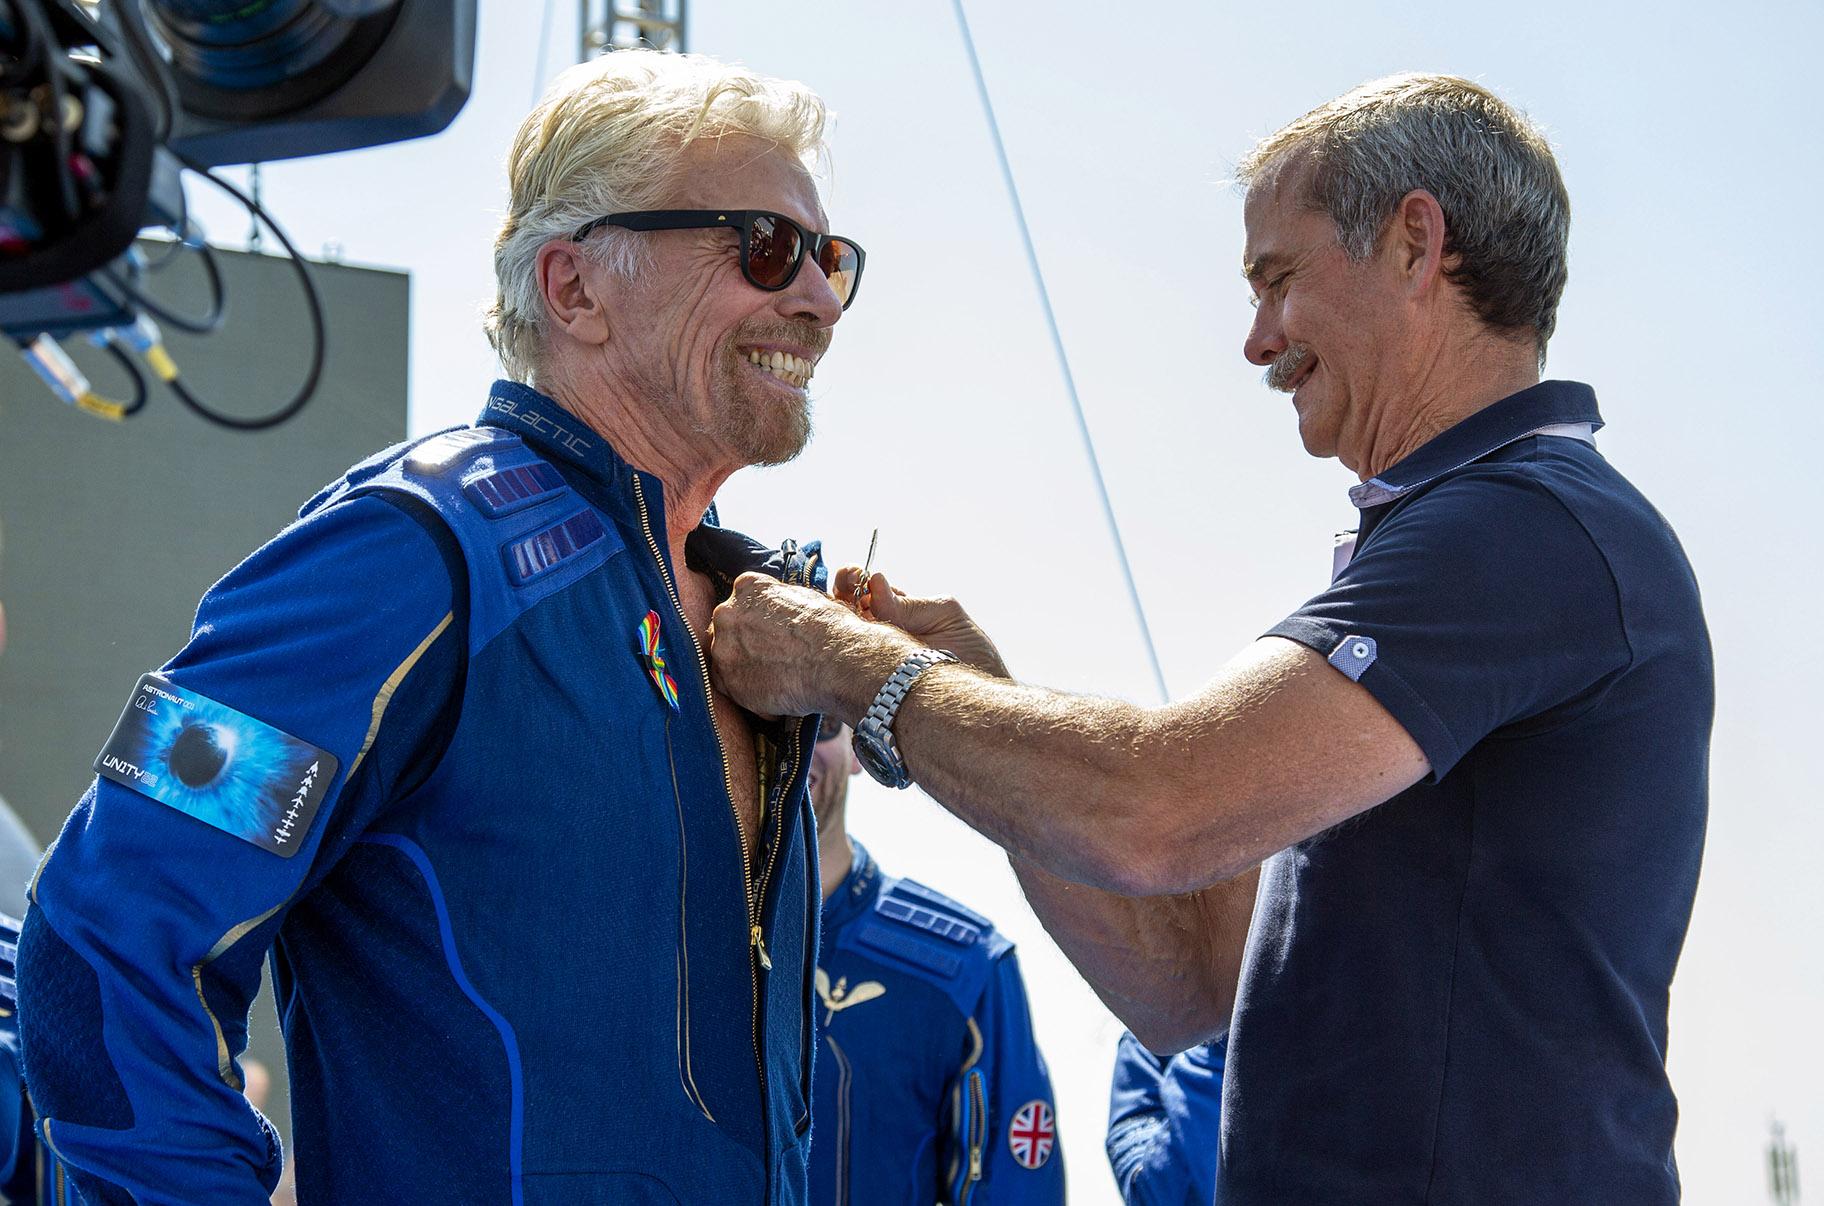 Virgin Galactic founder Richard Branson, left, receives a Virgin Galactic made astronaut wings pin from Canadian astronaut Chris Hadfield after his flight to space from Spaceport America near Truth or Consequences, N.M., Sunday, July 11, 2021. (AP Photo / Andres Leighton)